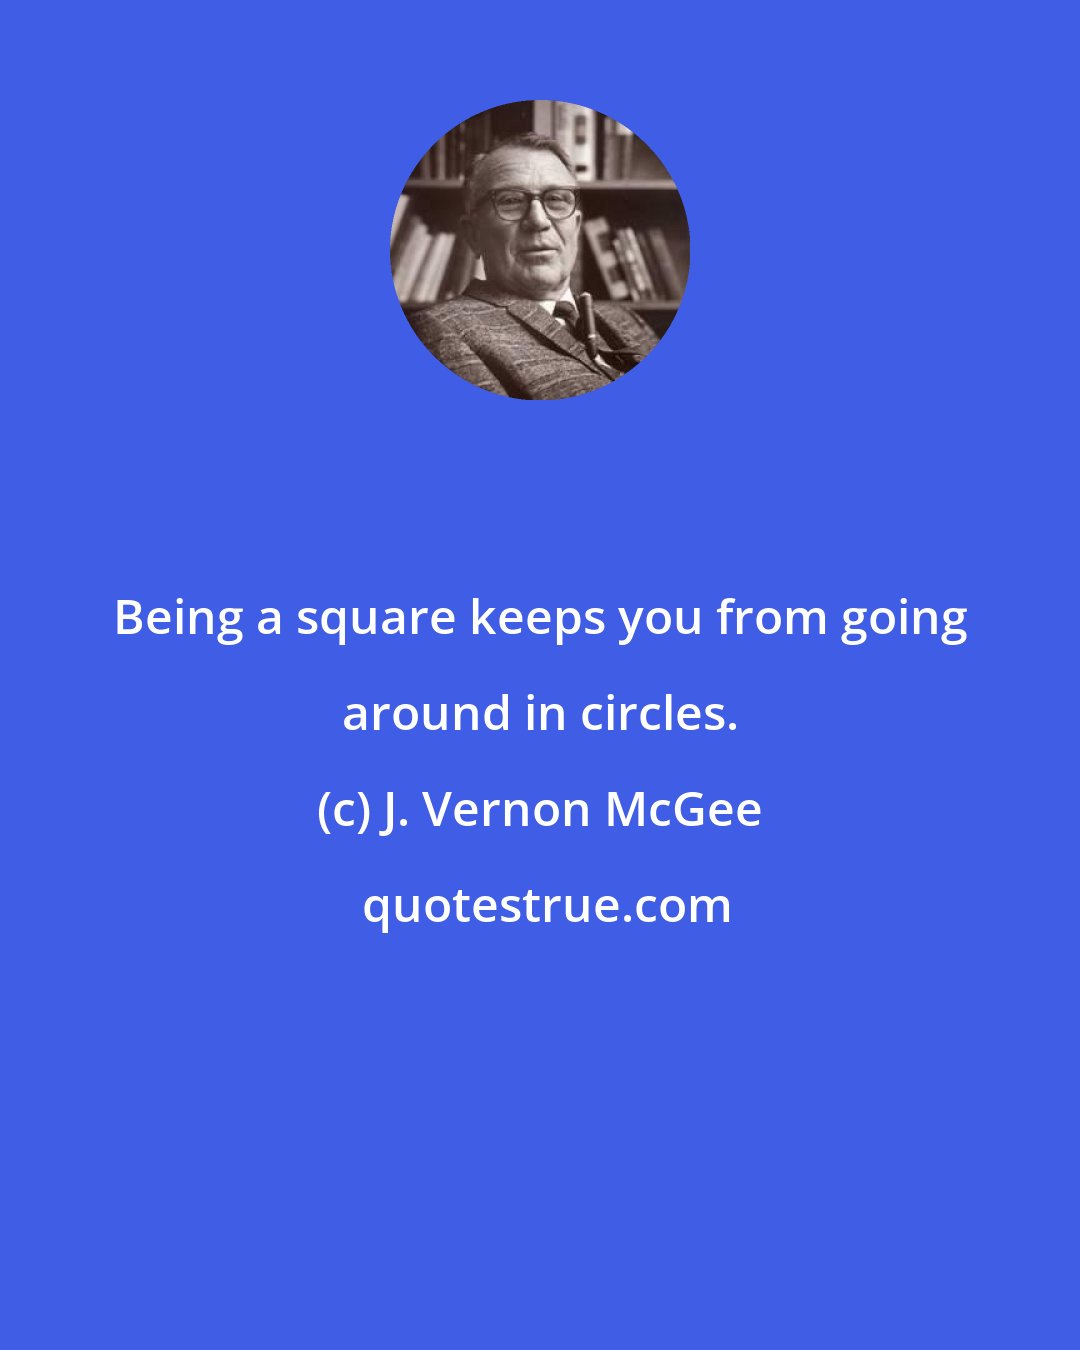 J. Vernon McGee: Being a square keeps you from going around in circles.